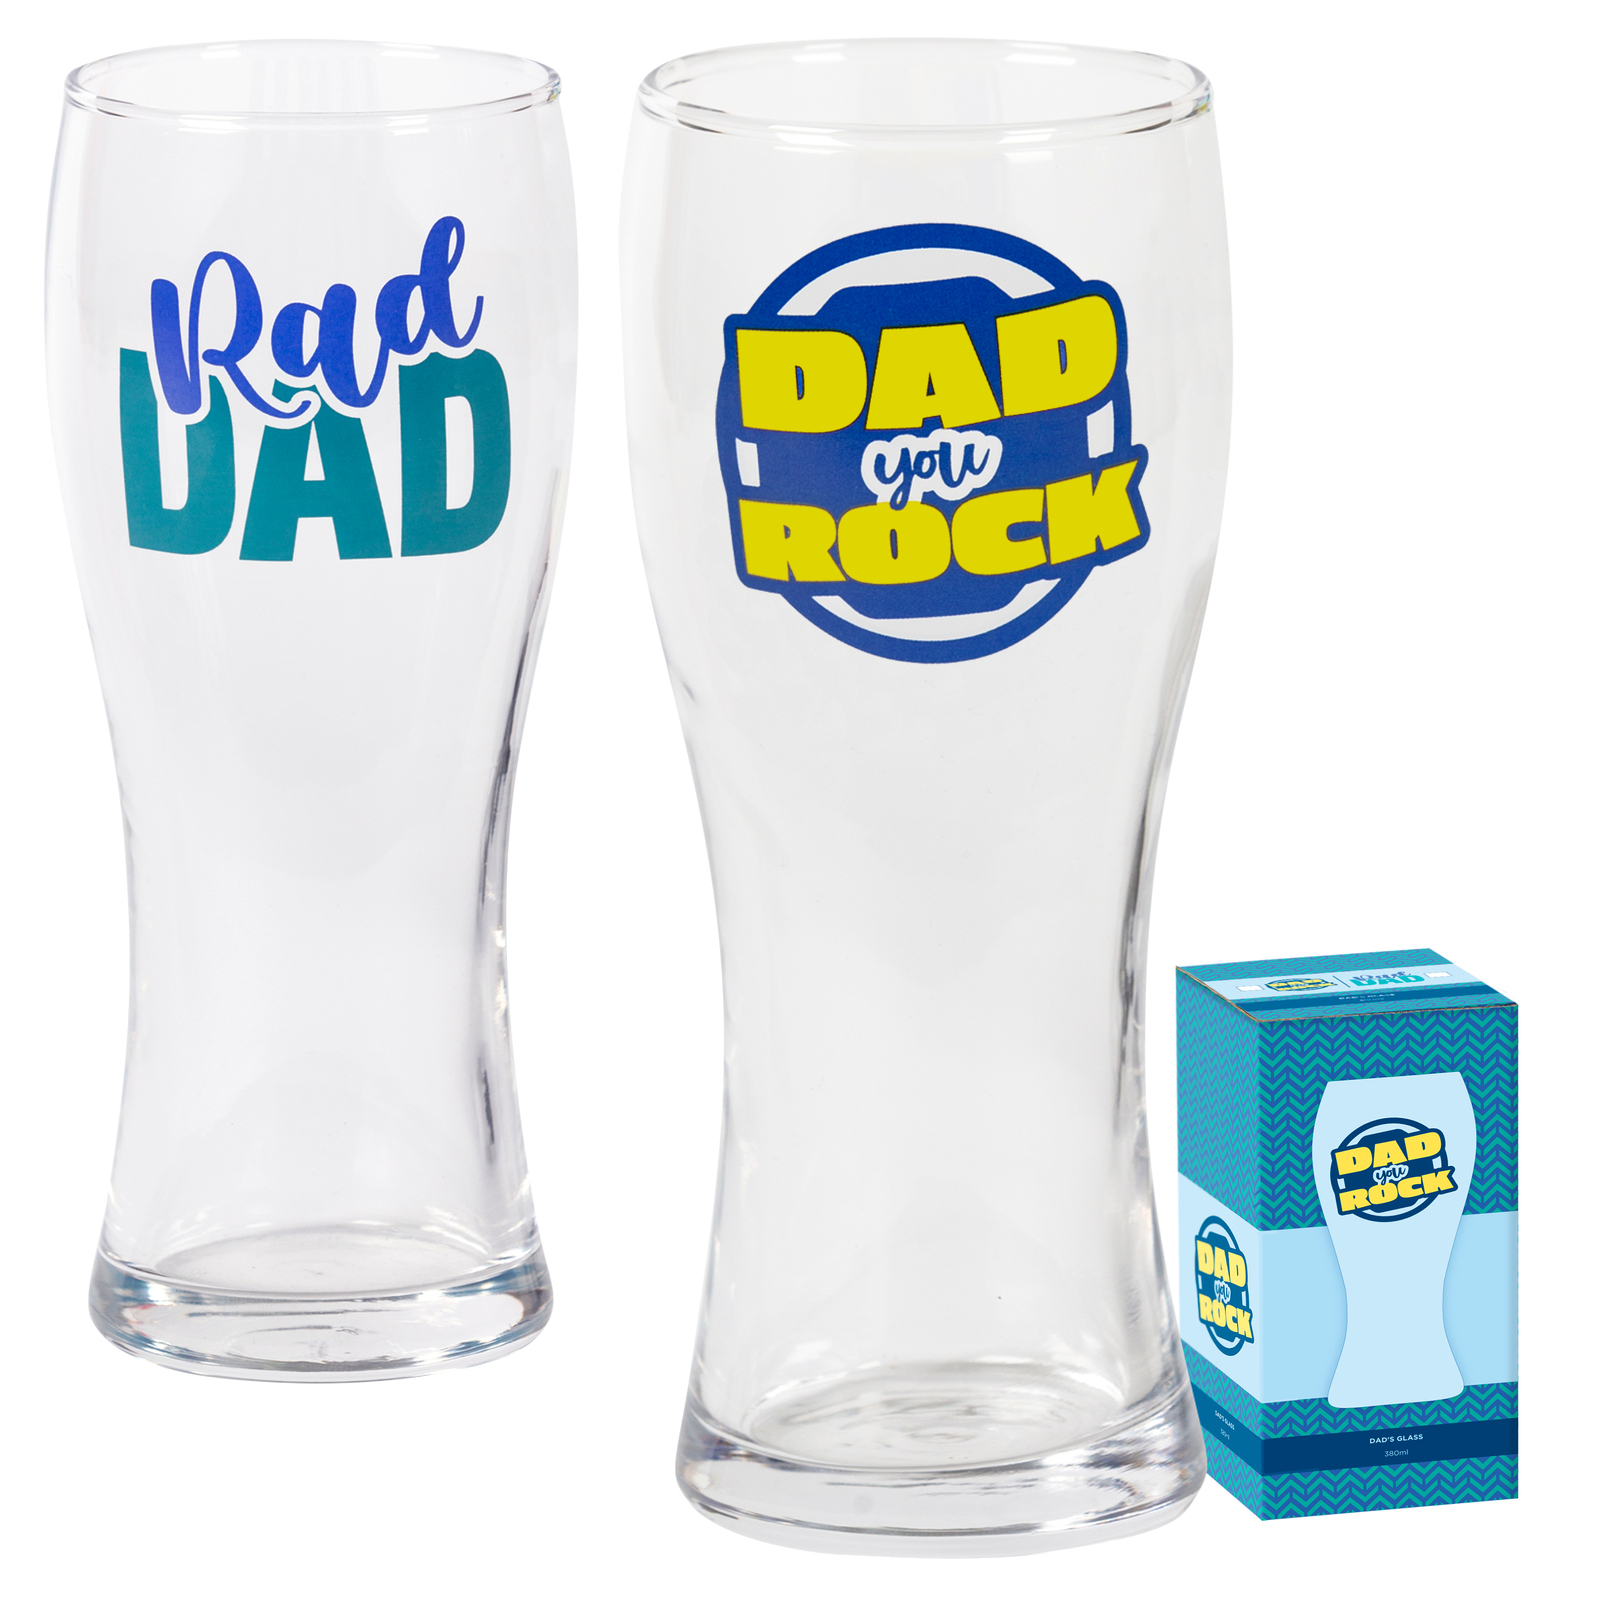 Dad's Glass